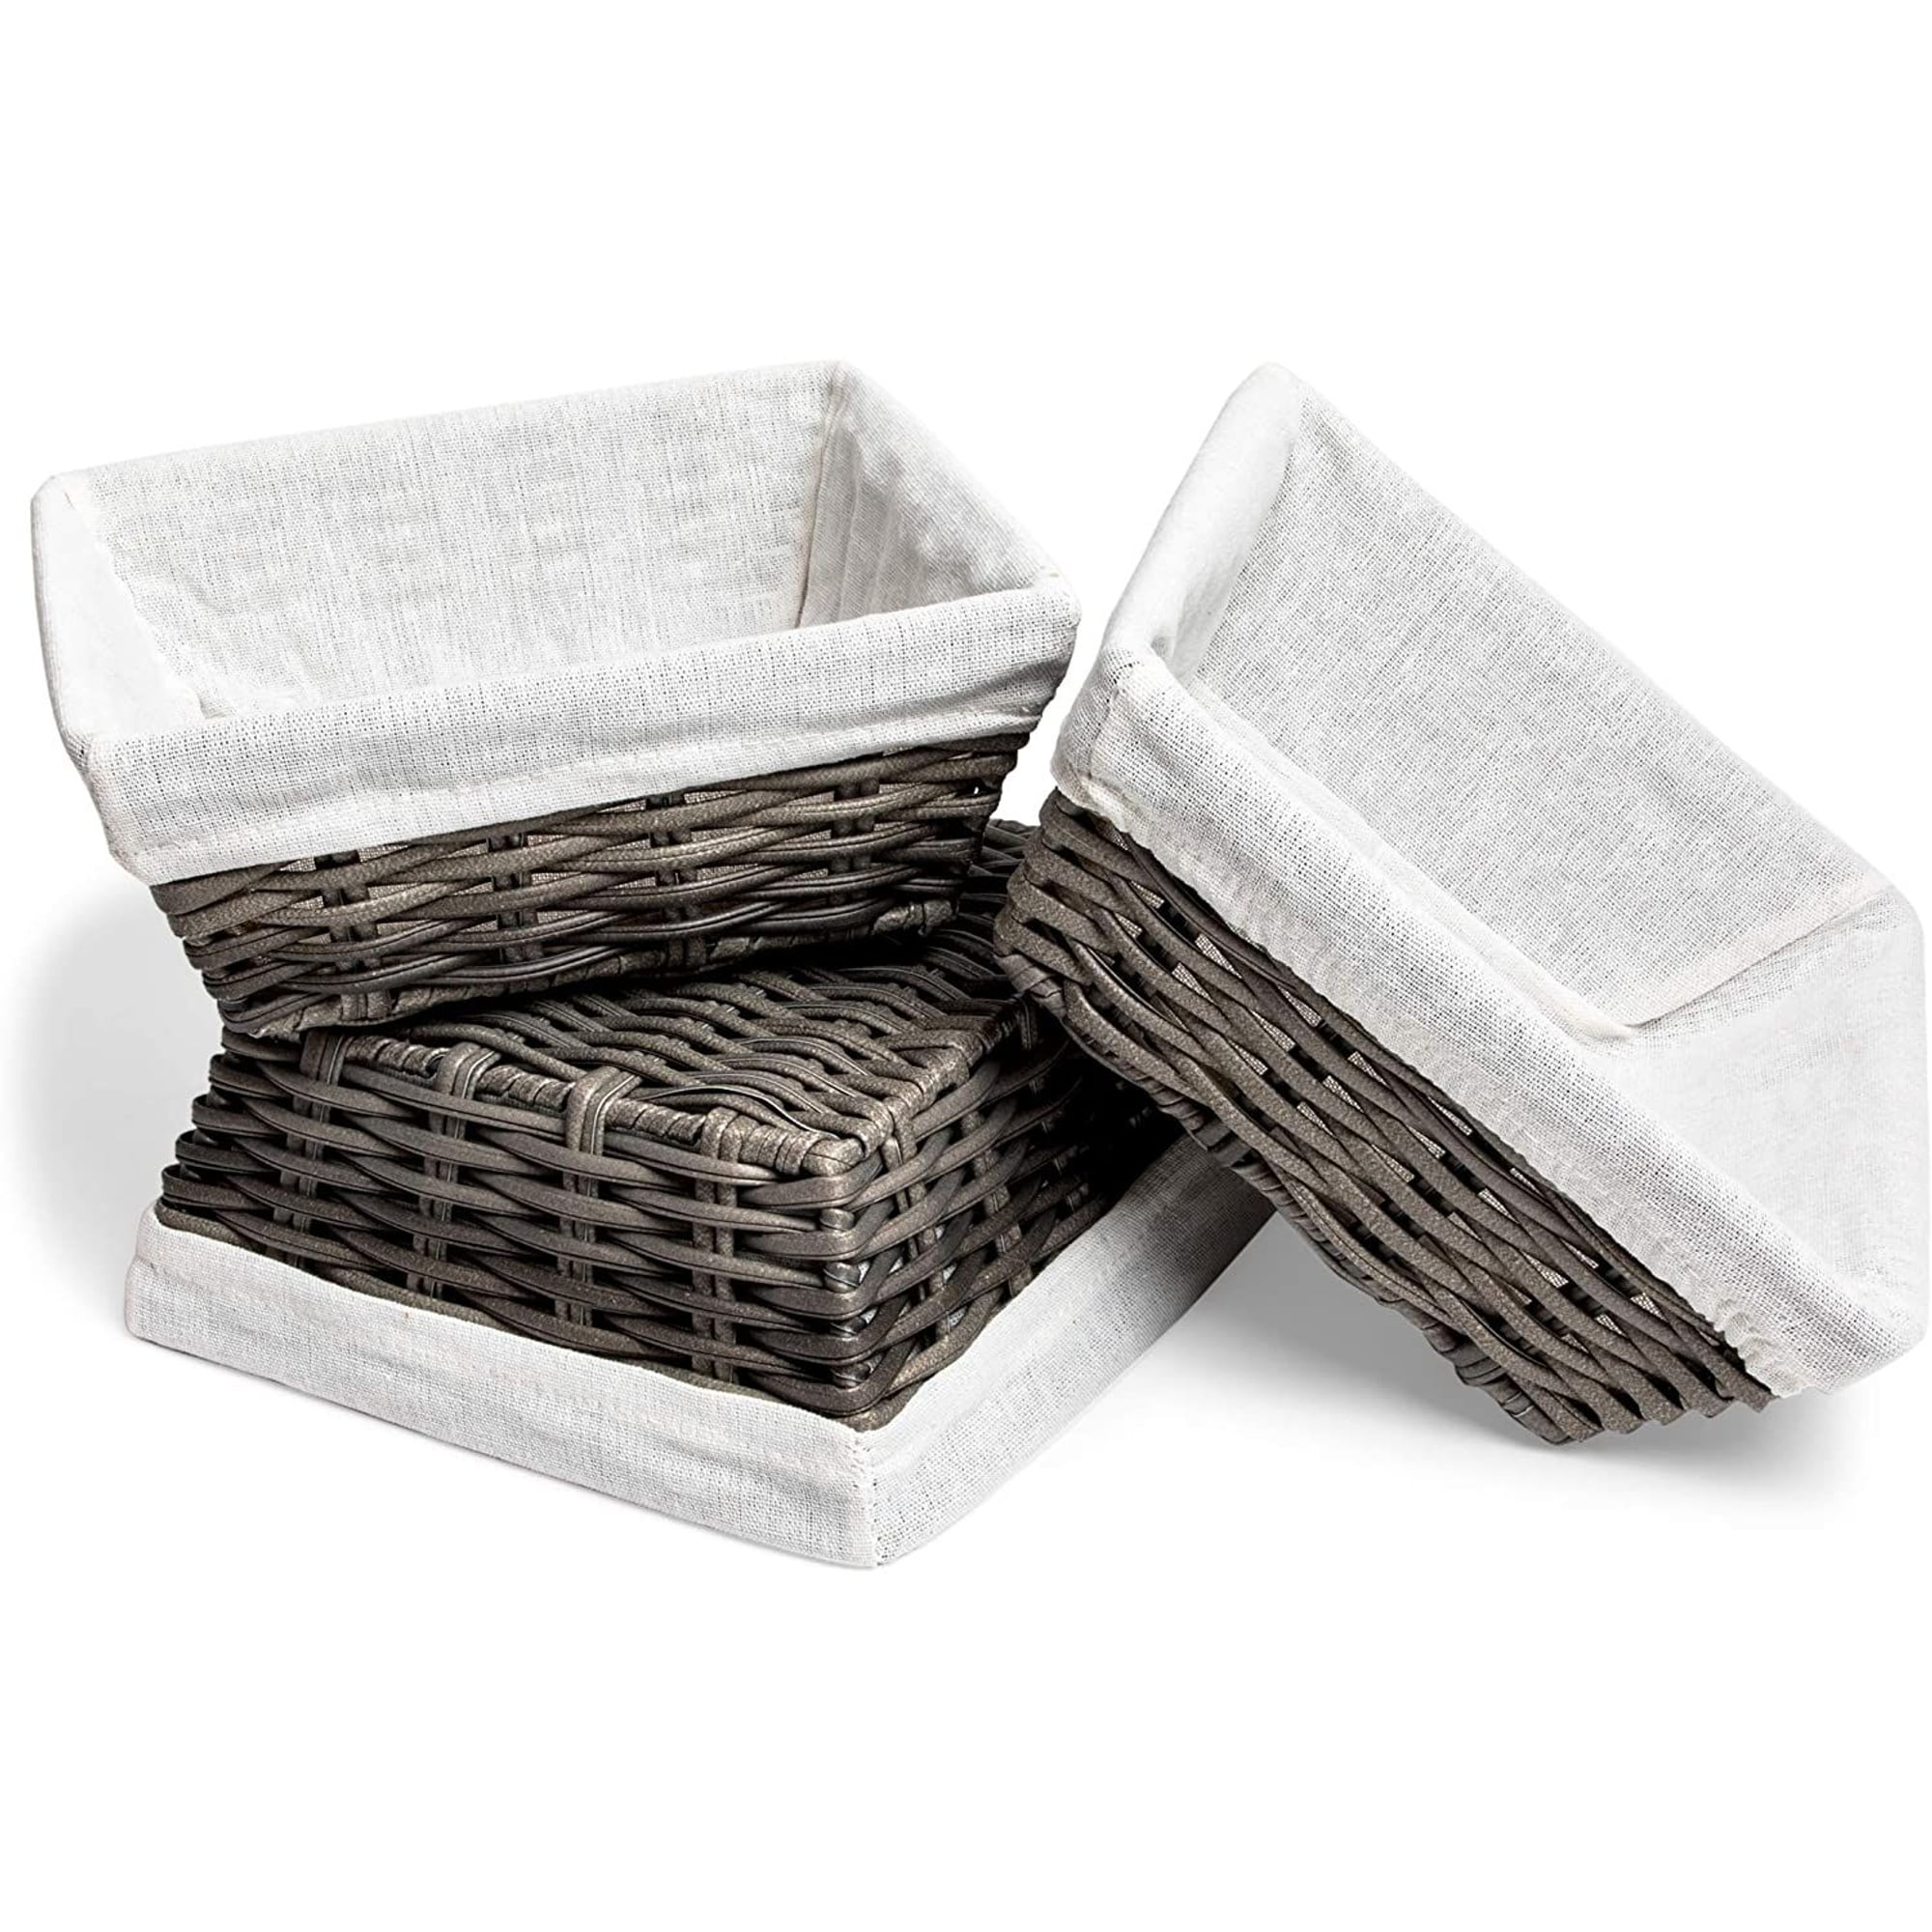 https://ak1.ostkcdn.com/images/products/is/images/direct/934f0d52d25651bcf9eaaeb1be041bec15a84306/Farmlyn-Creek-Square-Wicker-Storage-Baskets-with-Liners-%289-x-9-x-3.5-Inches%2C-3-Pack%29.jpg